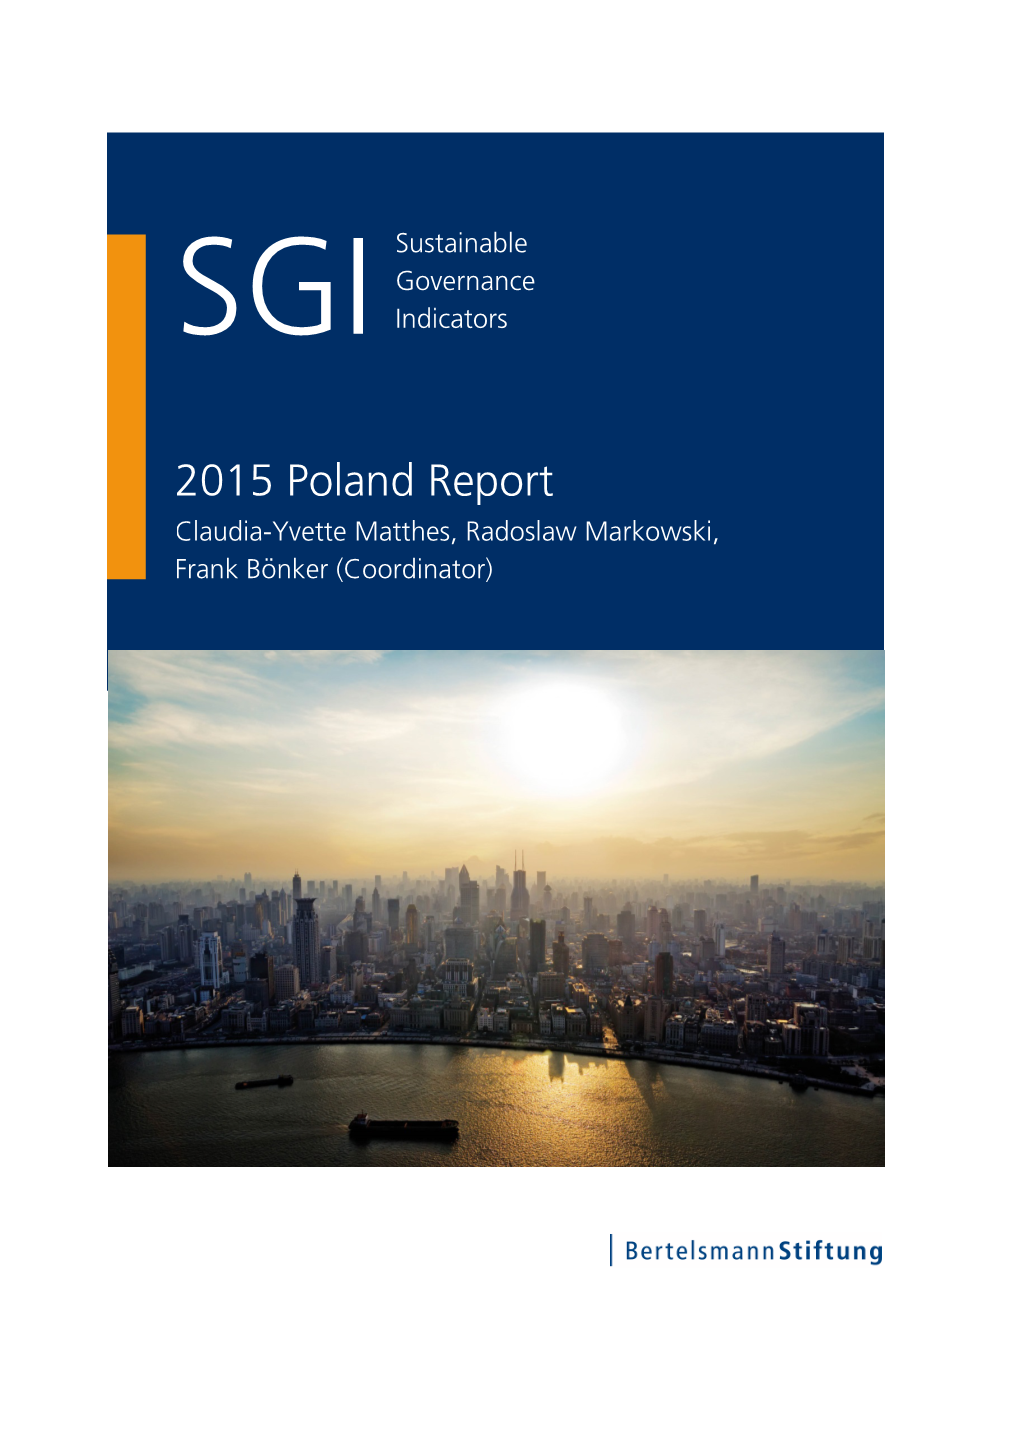 2015 Poland Country Report | SGI Sustainable Governance Indicators